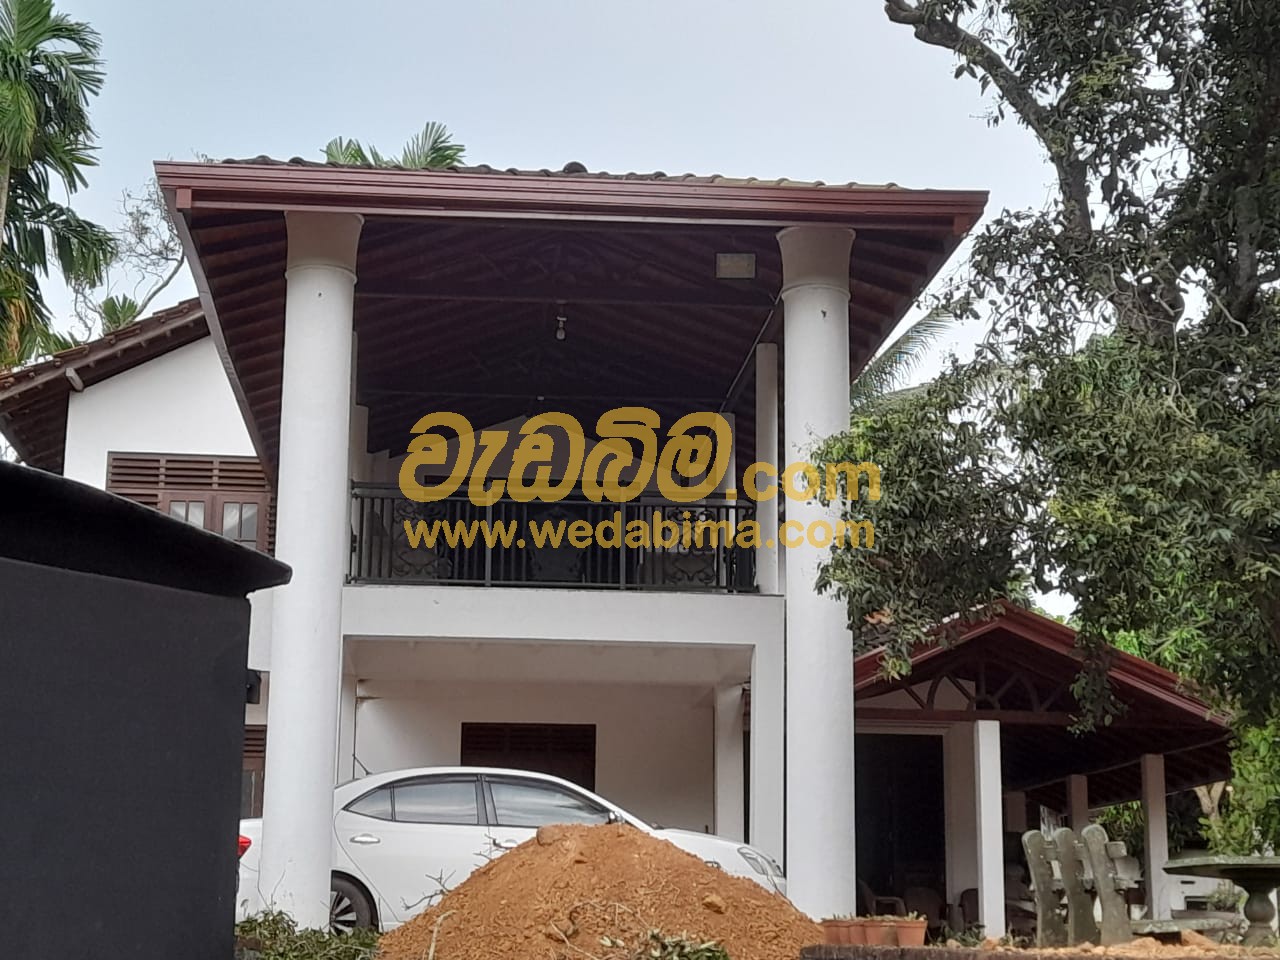 Roofing Construction Company in Colombo.